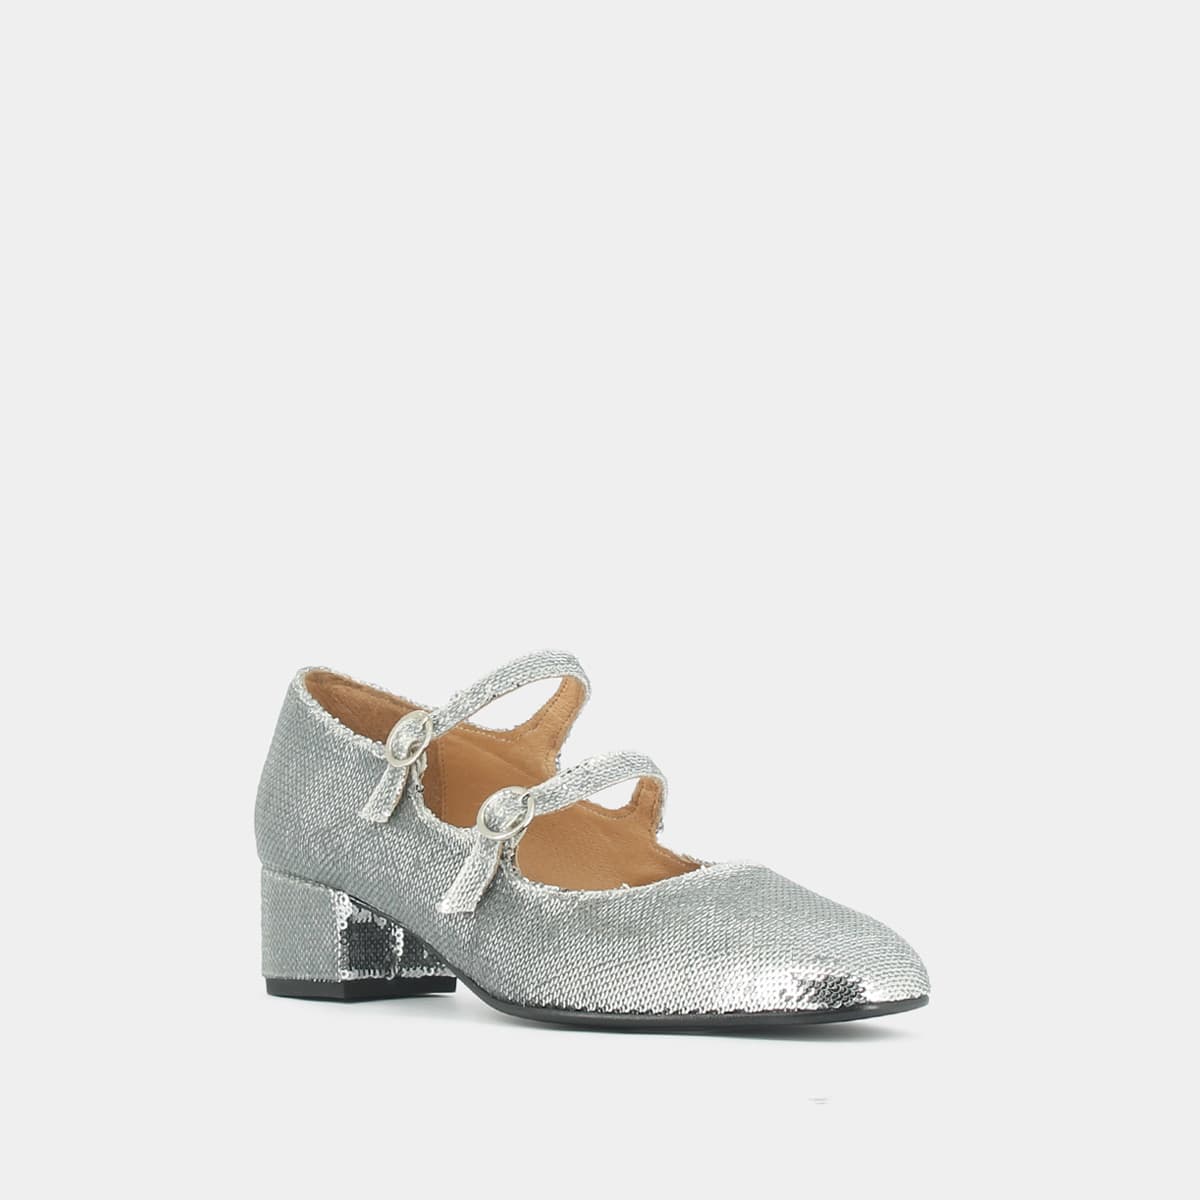 Babies with double buckles and heel in silver sequins